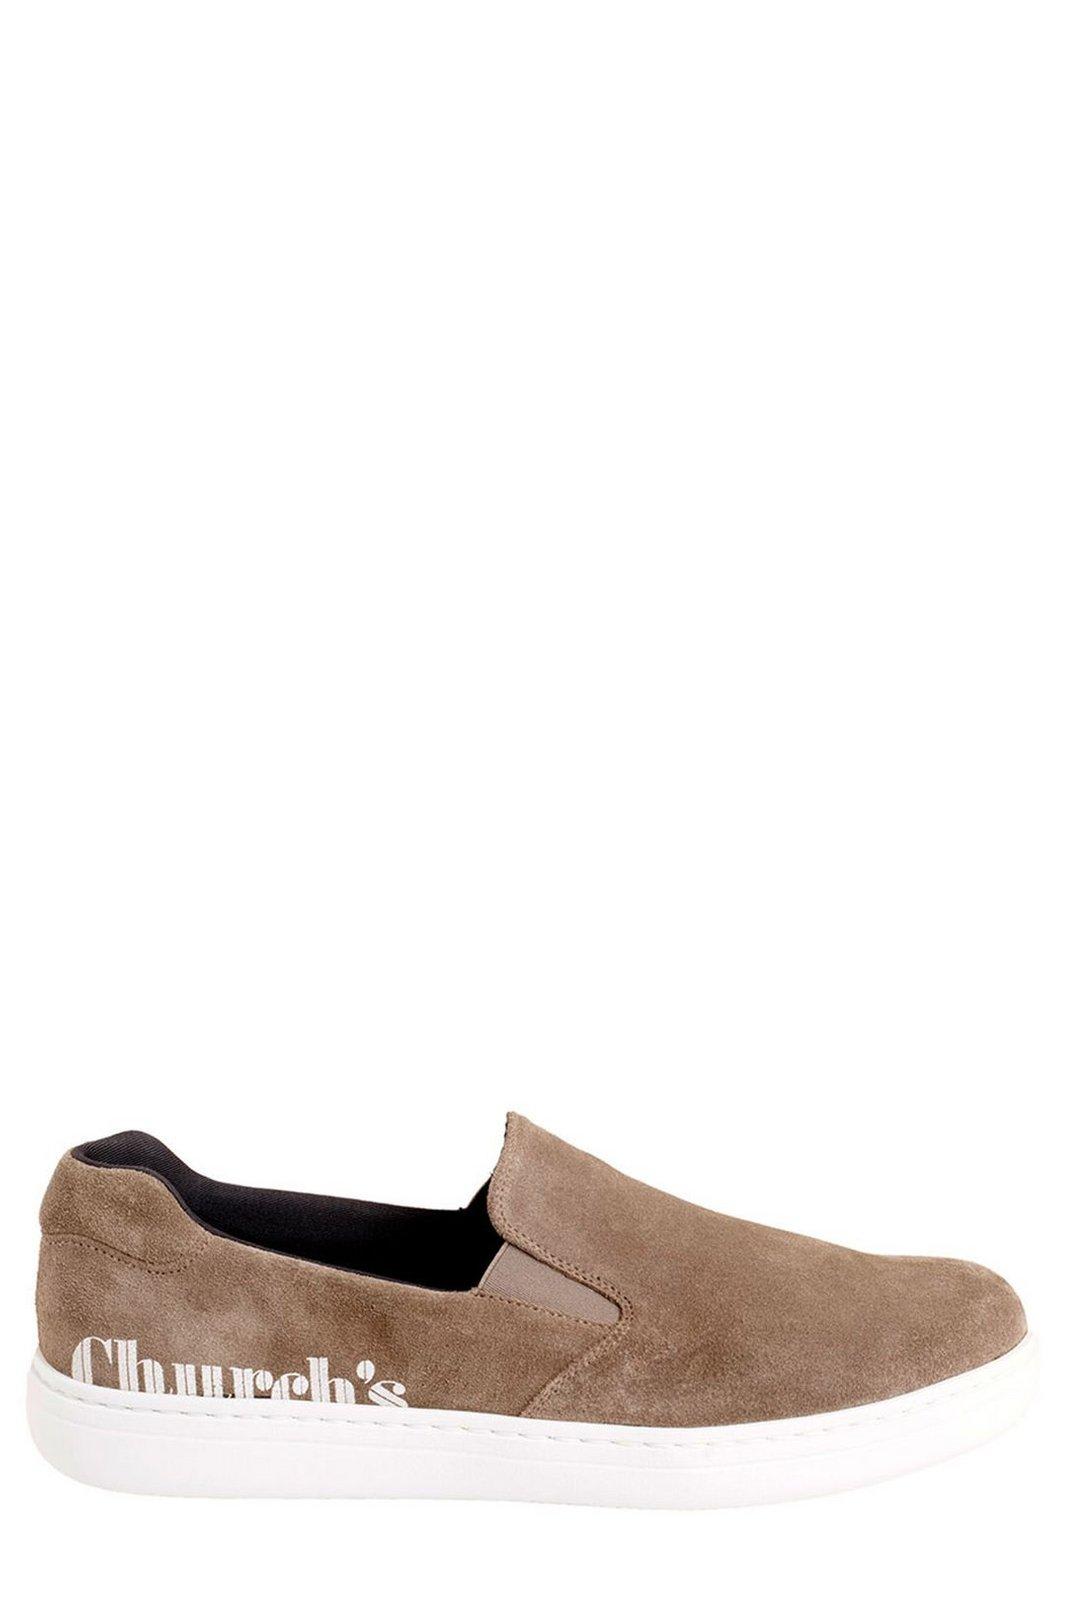 Fawley Slip-on Loafers Loafers